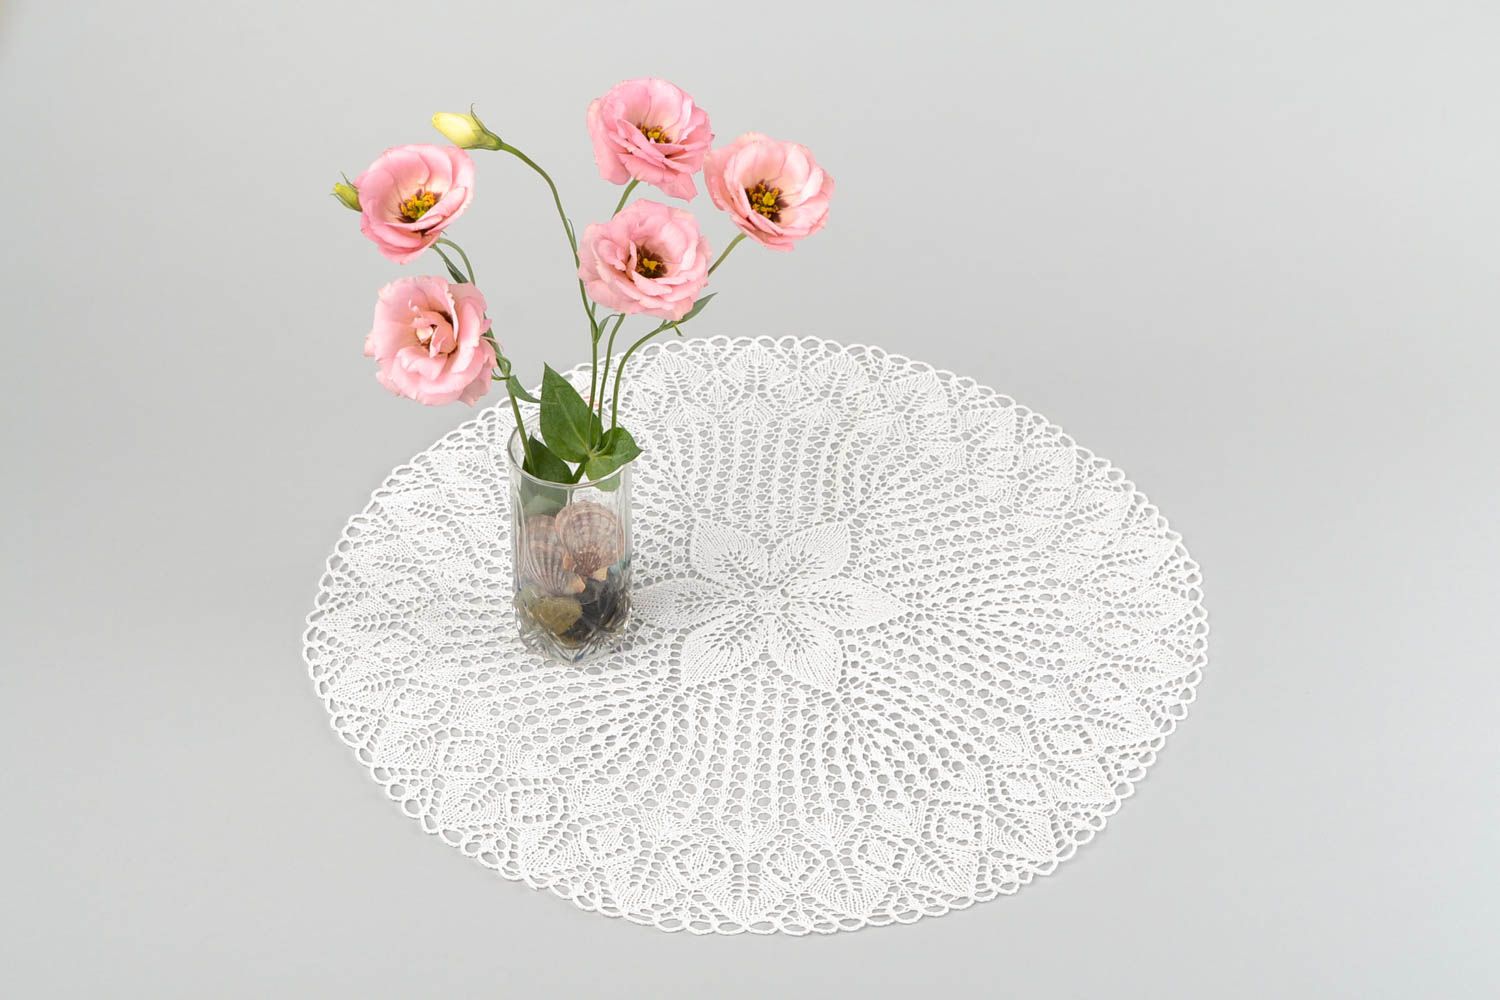 Openwork knitted tablecloth handmade table napkin vintage style interior decor photo 1